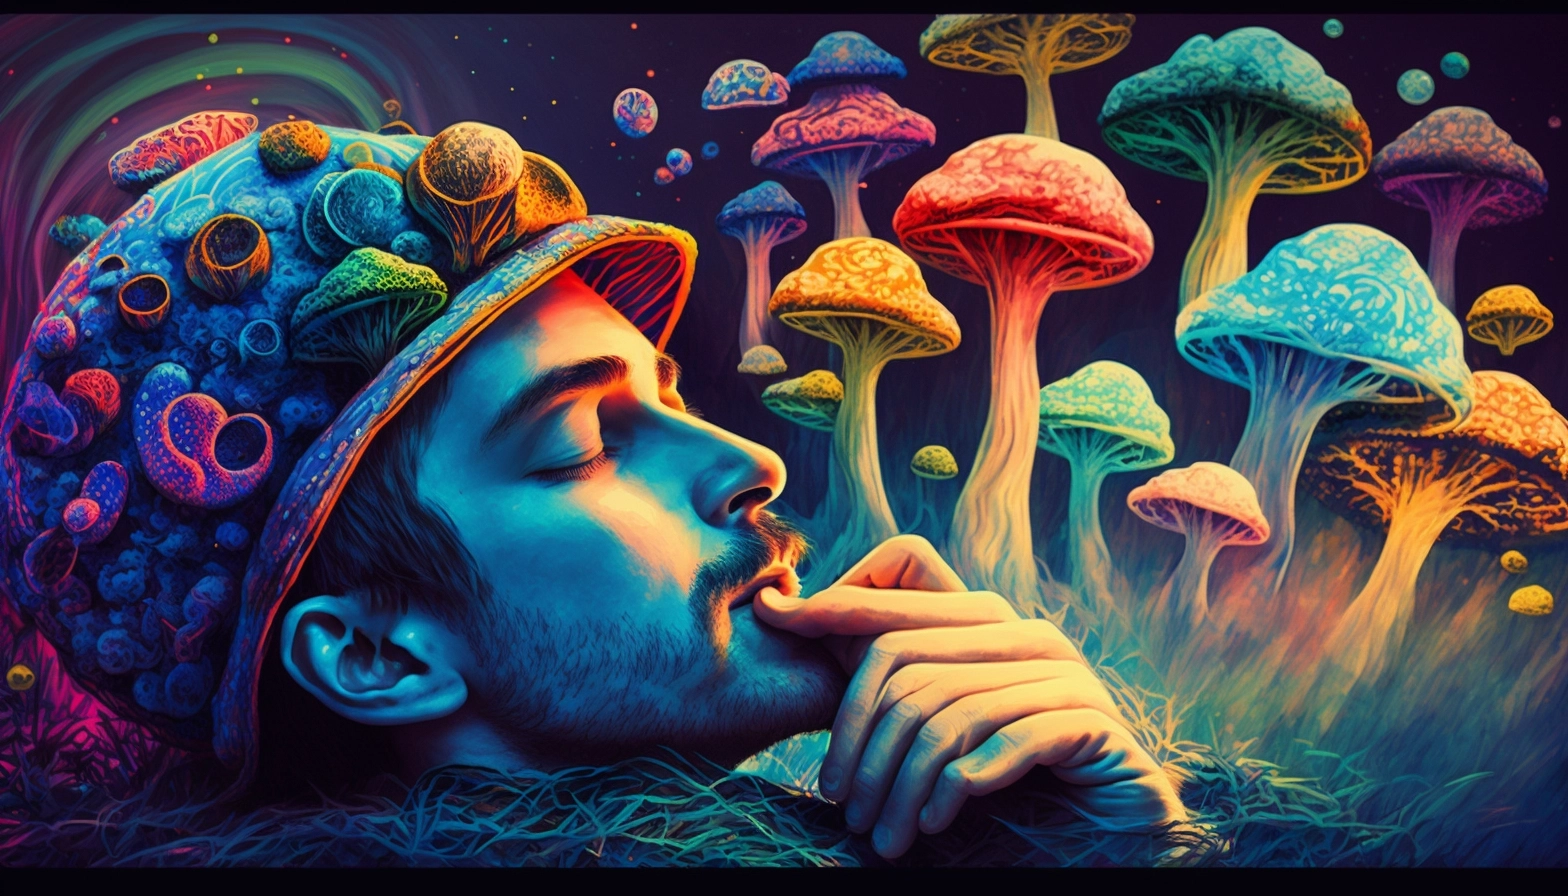 A colorful man sleeping on shrooms